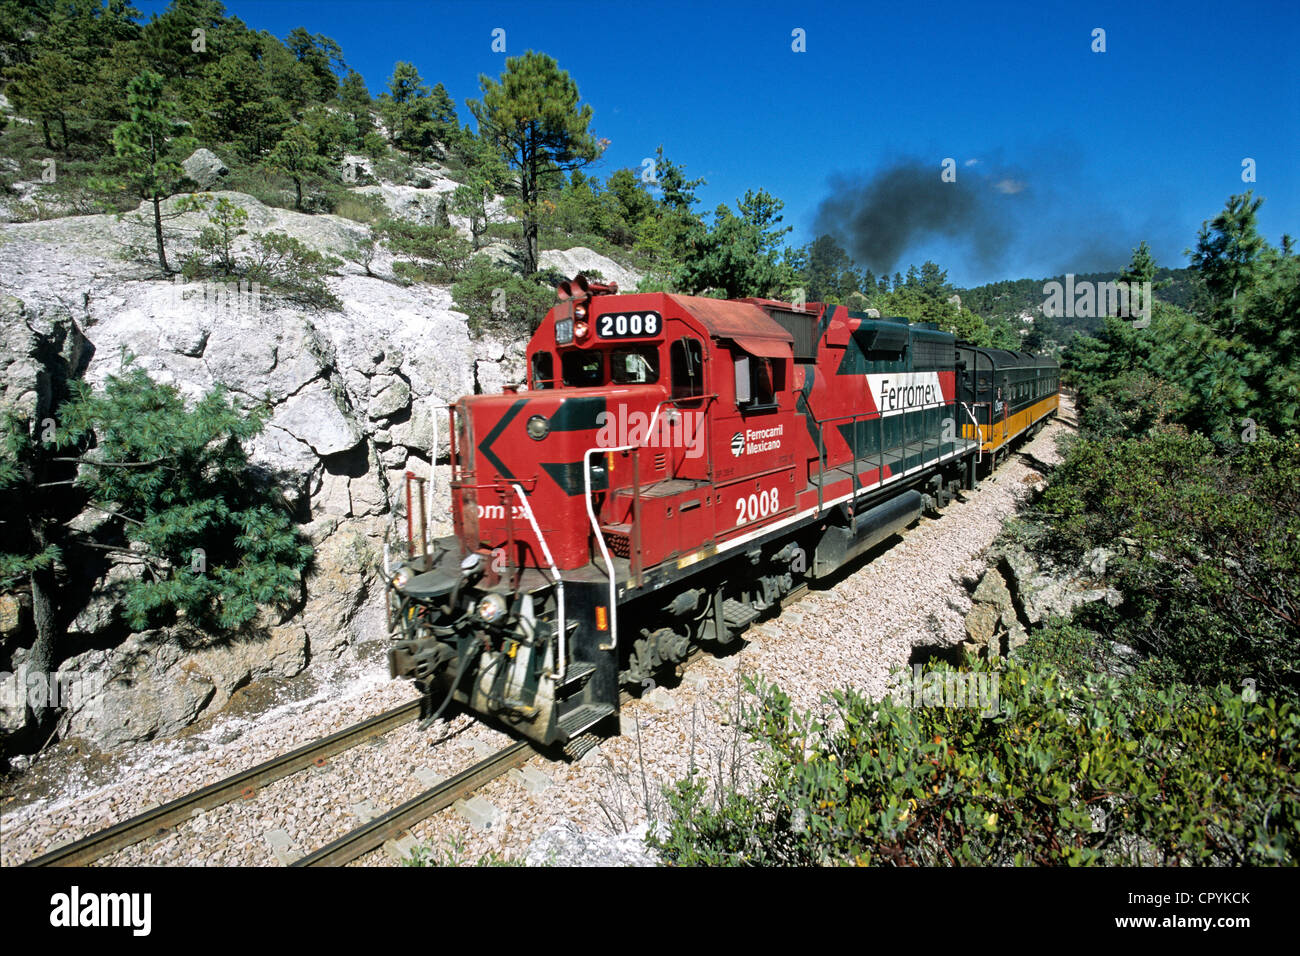 Mexico, Chihuahua State, after Creel, El Chepe goes to Divisadero Station at the edge of Copper Canyon Stock Photo